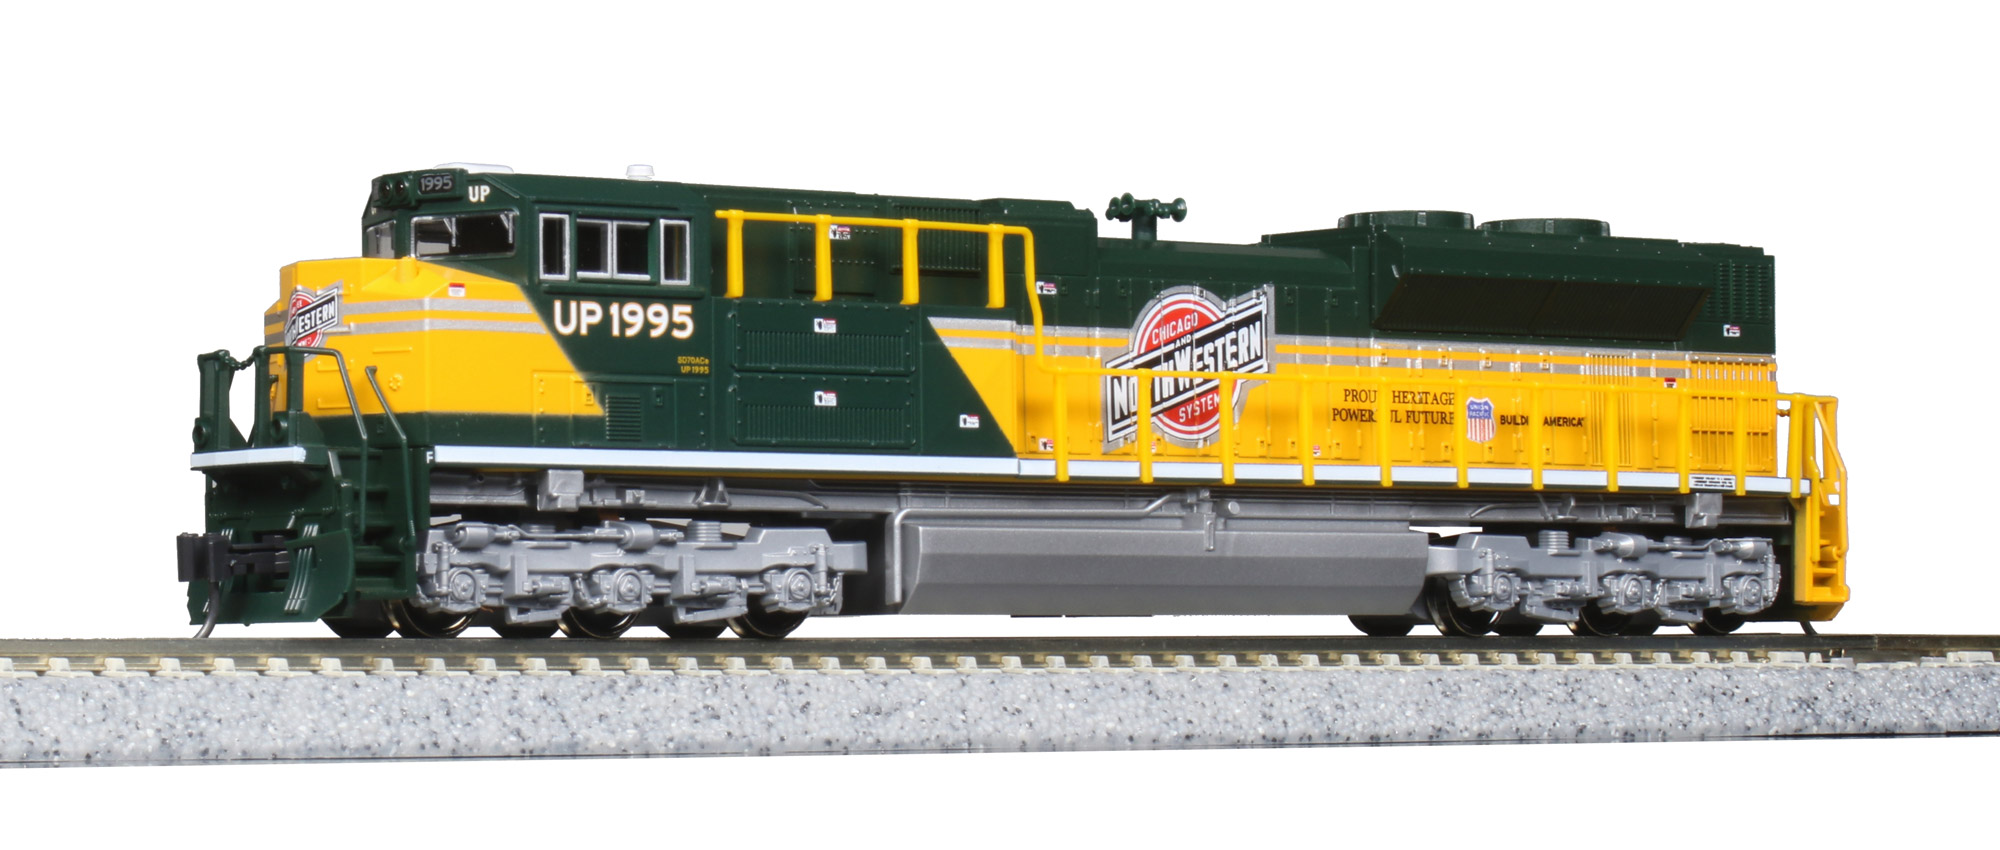 Kato N 176-8407 DCC Ready EMD SD70ACe Diesel Locomotive Union Pacific 'C&NW  Heritage' UP #1995